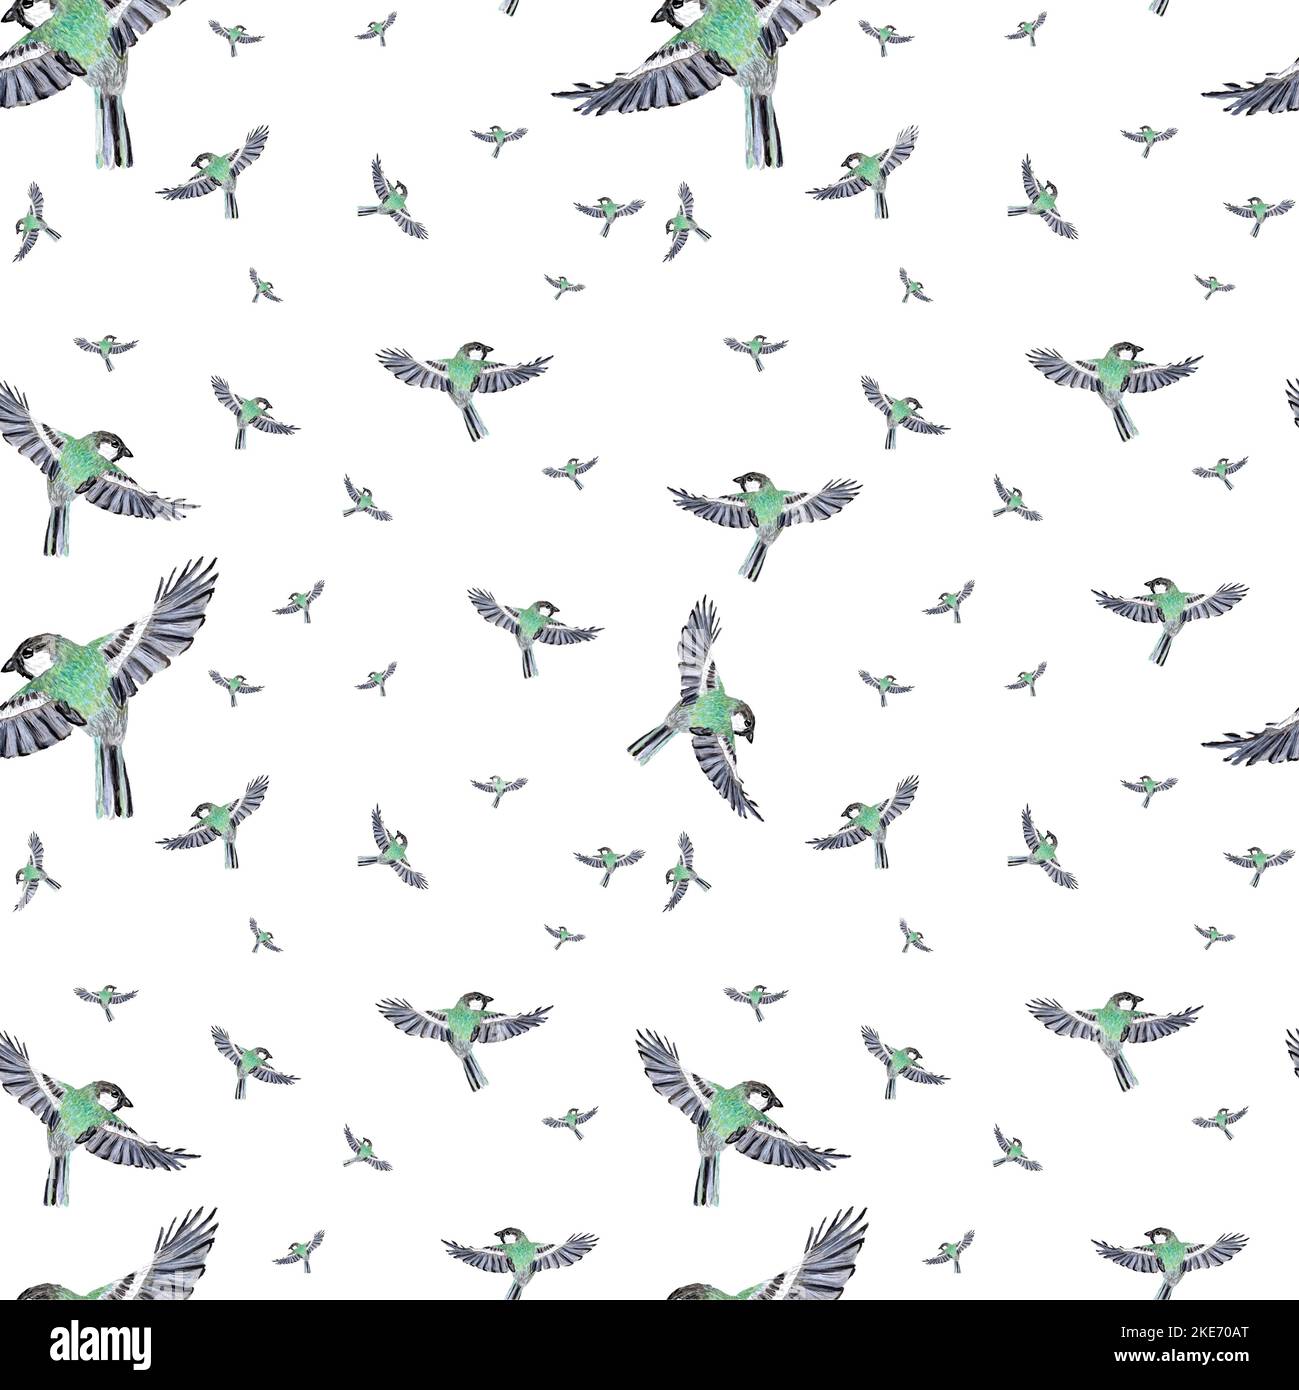 Bird green fly pattern a watercolor illustration  Stock Photo